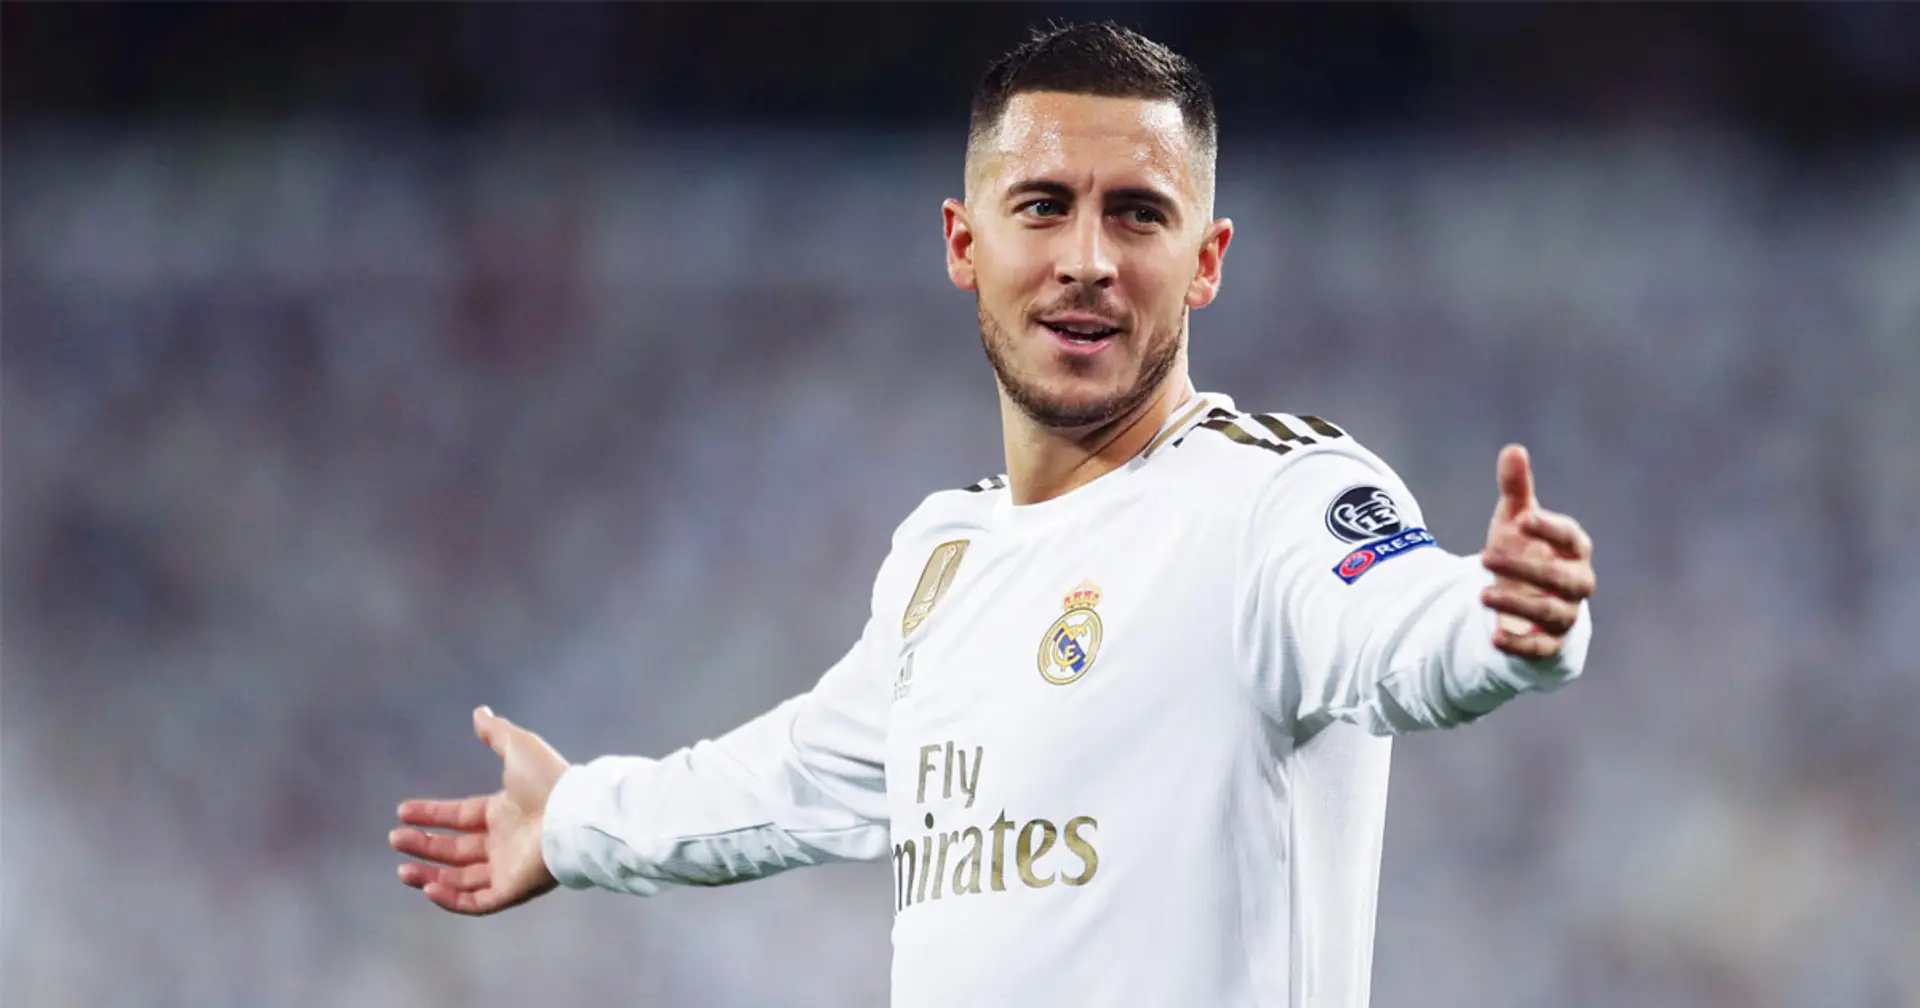 €100m what? Eden Hazard might cost Real Madrid up to €160m - tier-1 Belgian source